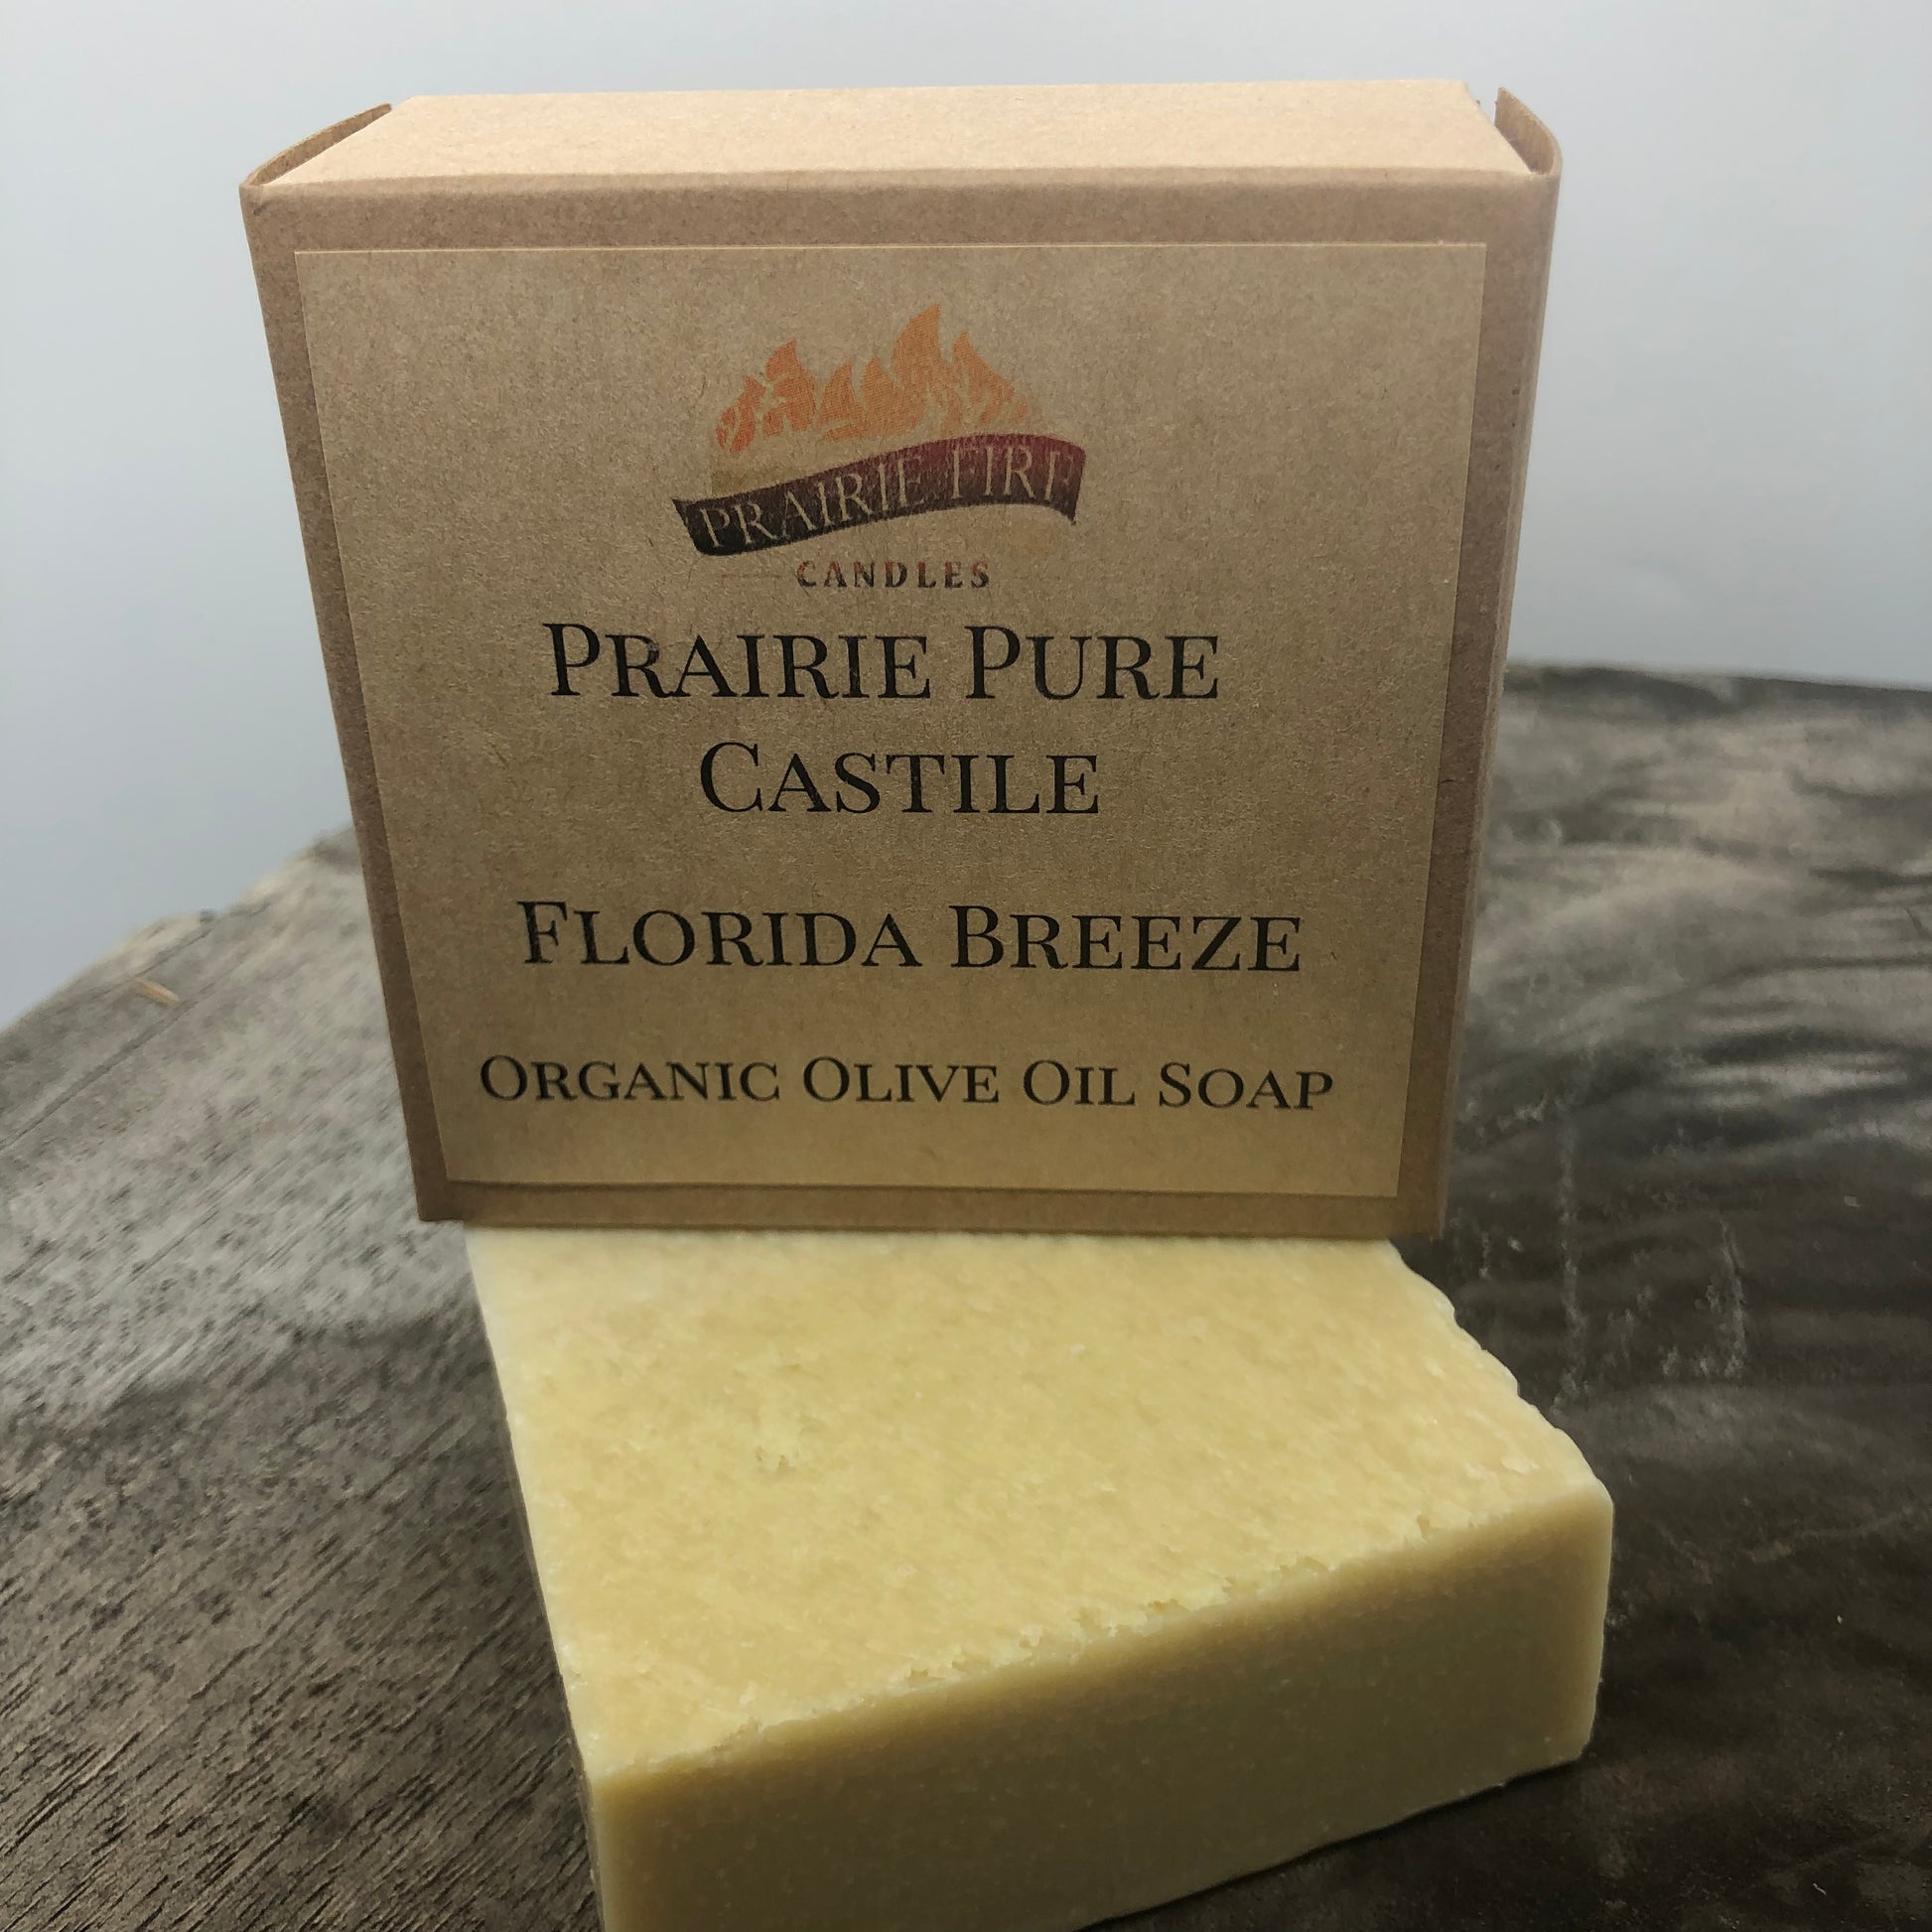 Florida Breeze Real Castile Organic Olive Oil Soap for Sensitive Skin - Dye Free - 100% Certified Organic Extra Virgin Olive Oil - Prairie Fire Candles